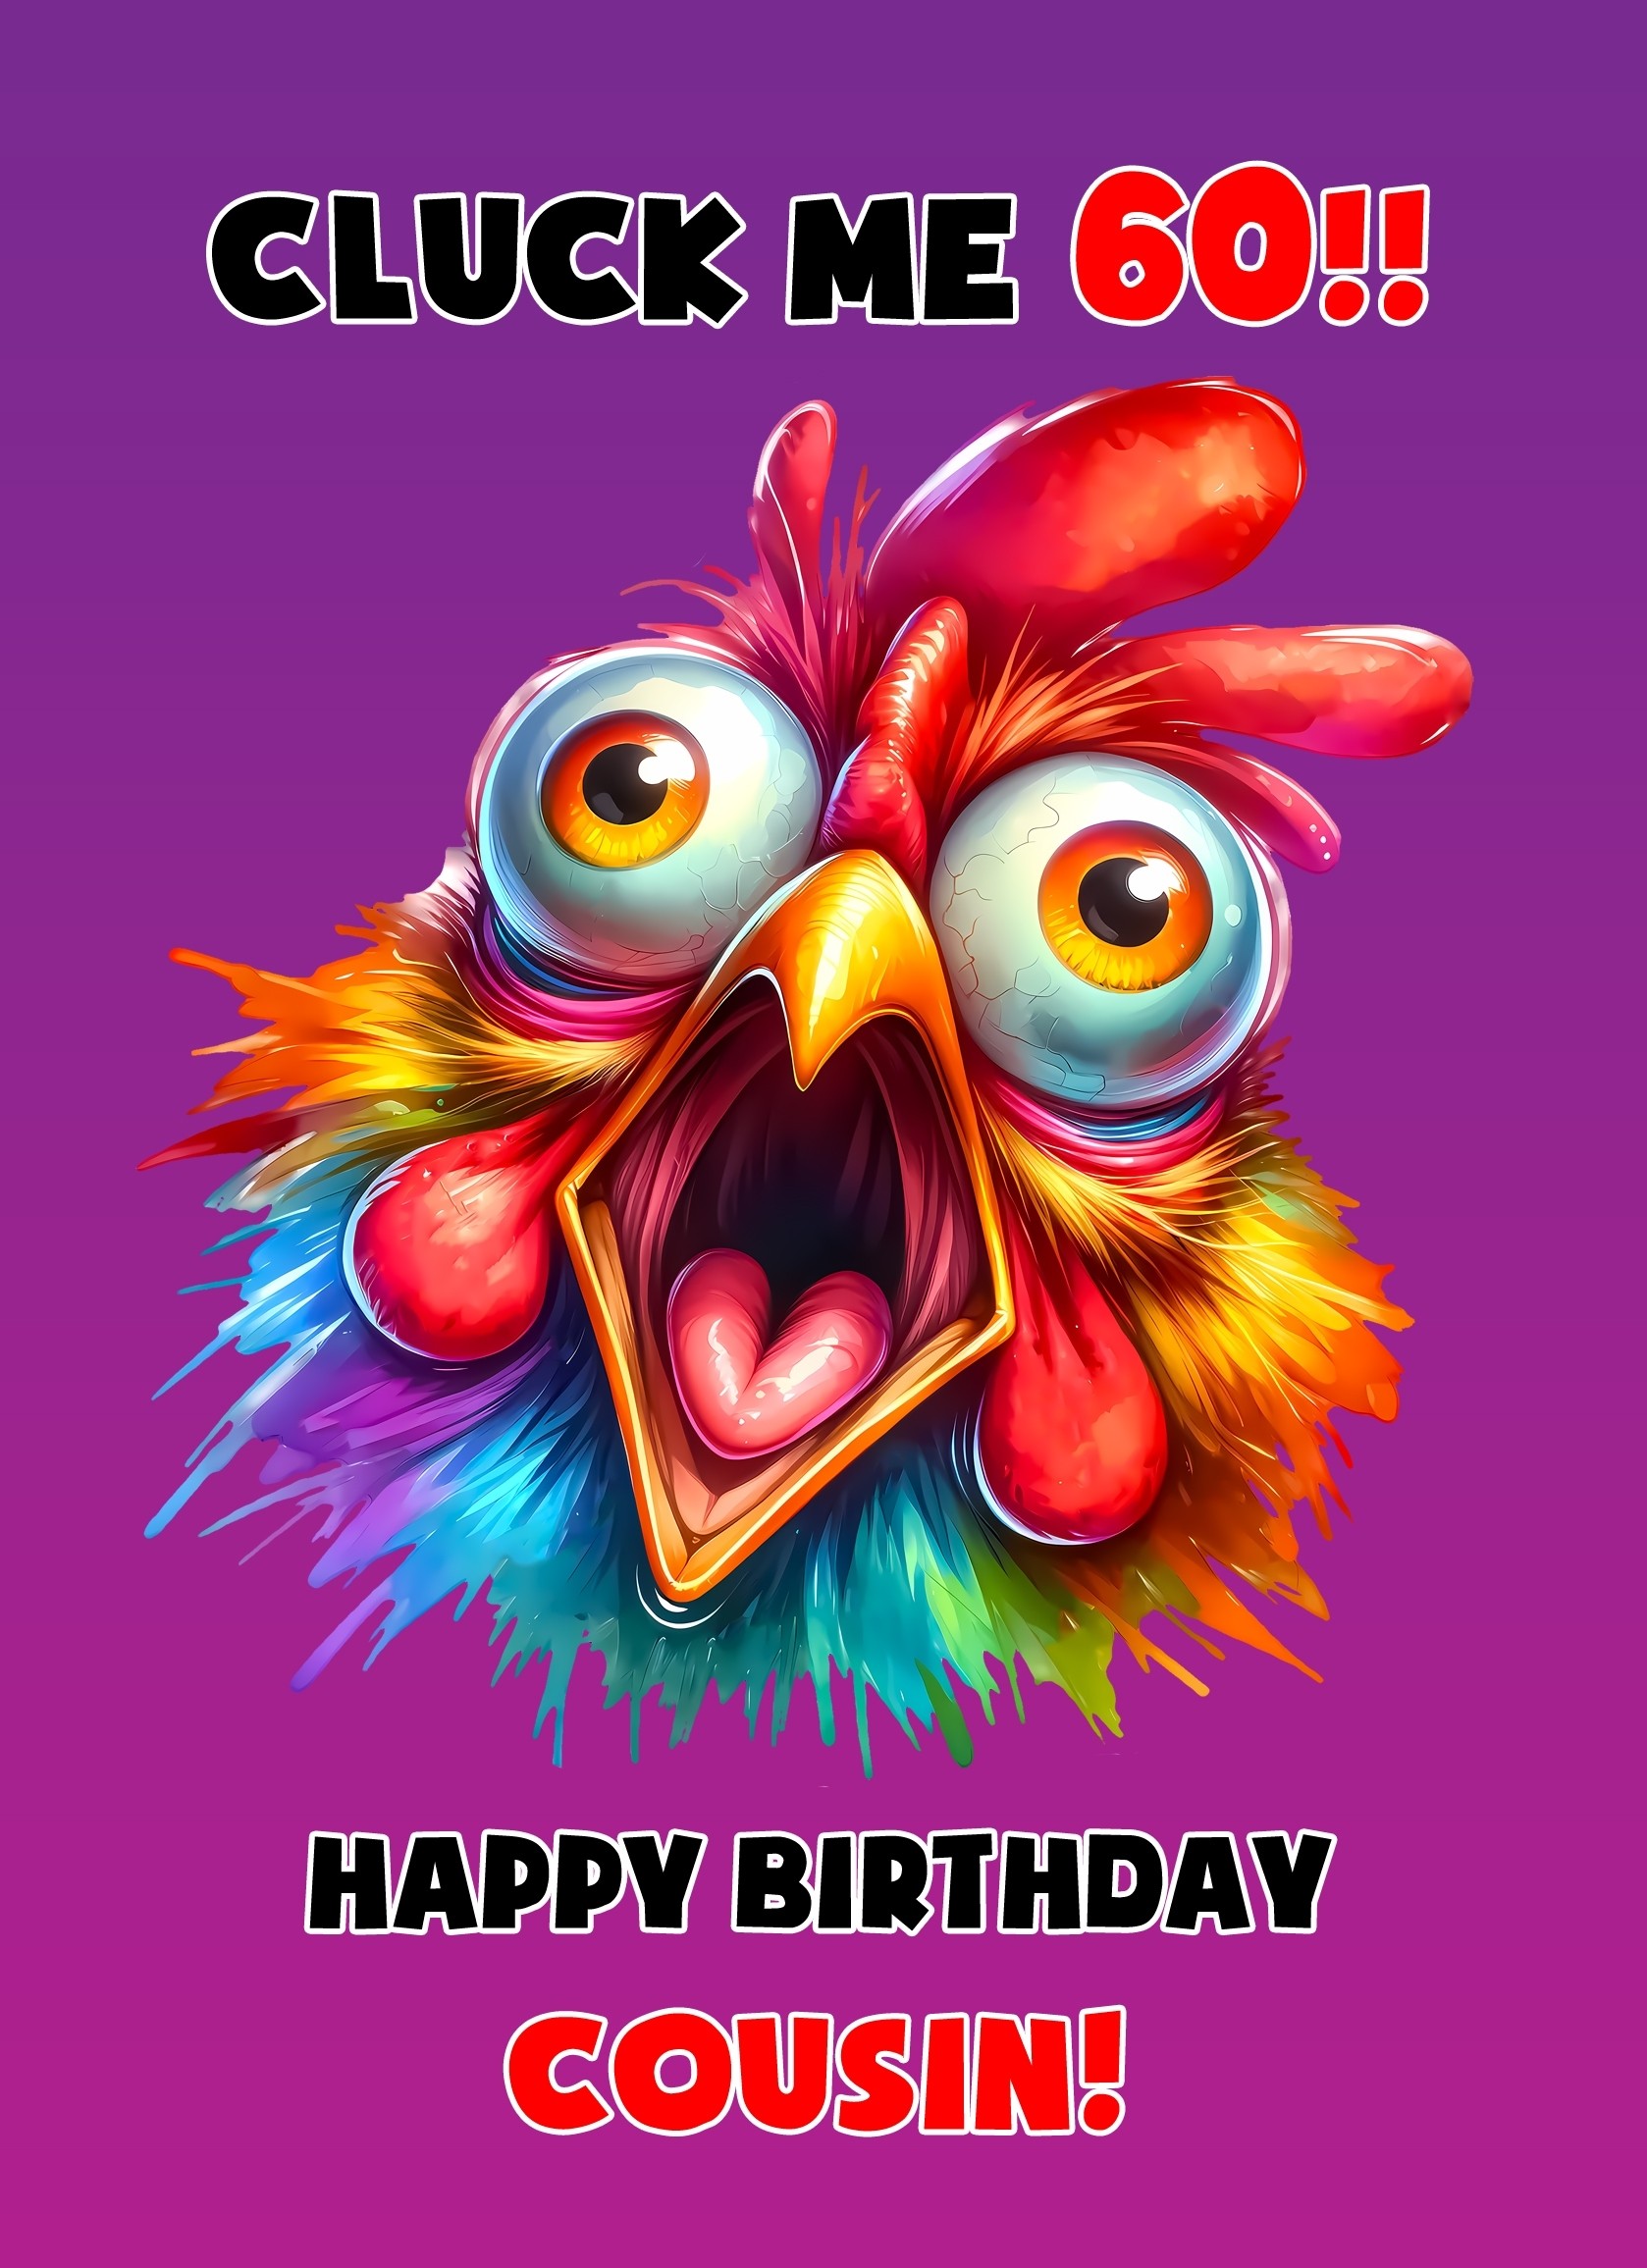 Cousin 60th Birthday Card (Funny Shocked Chicken Humour)